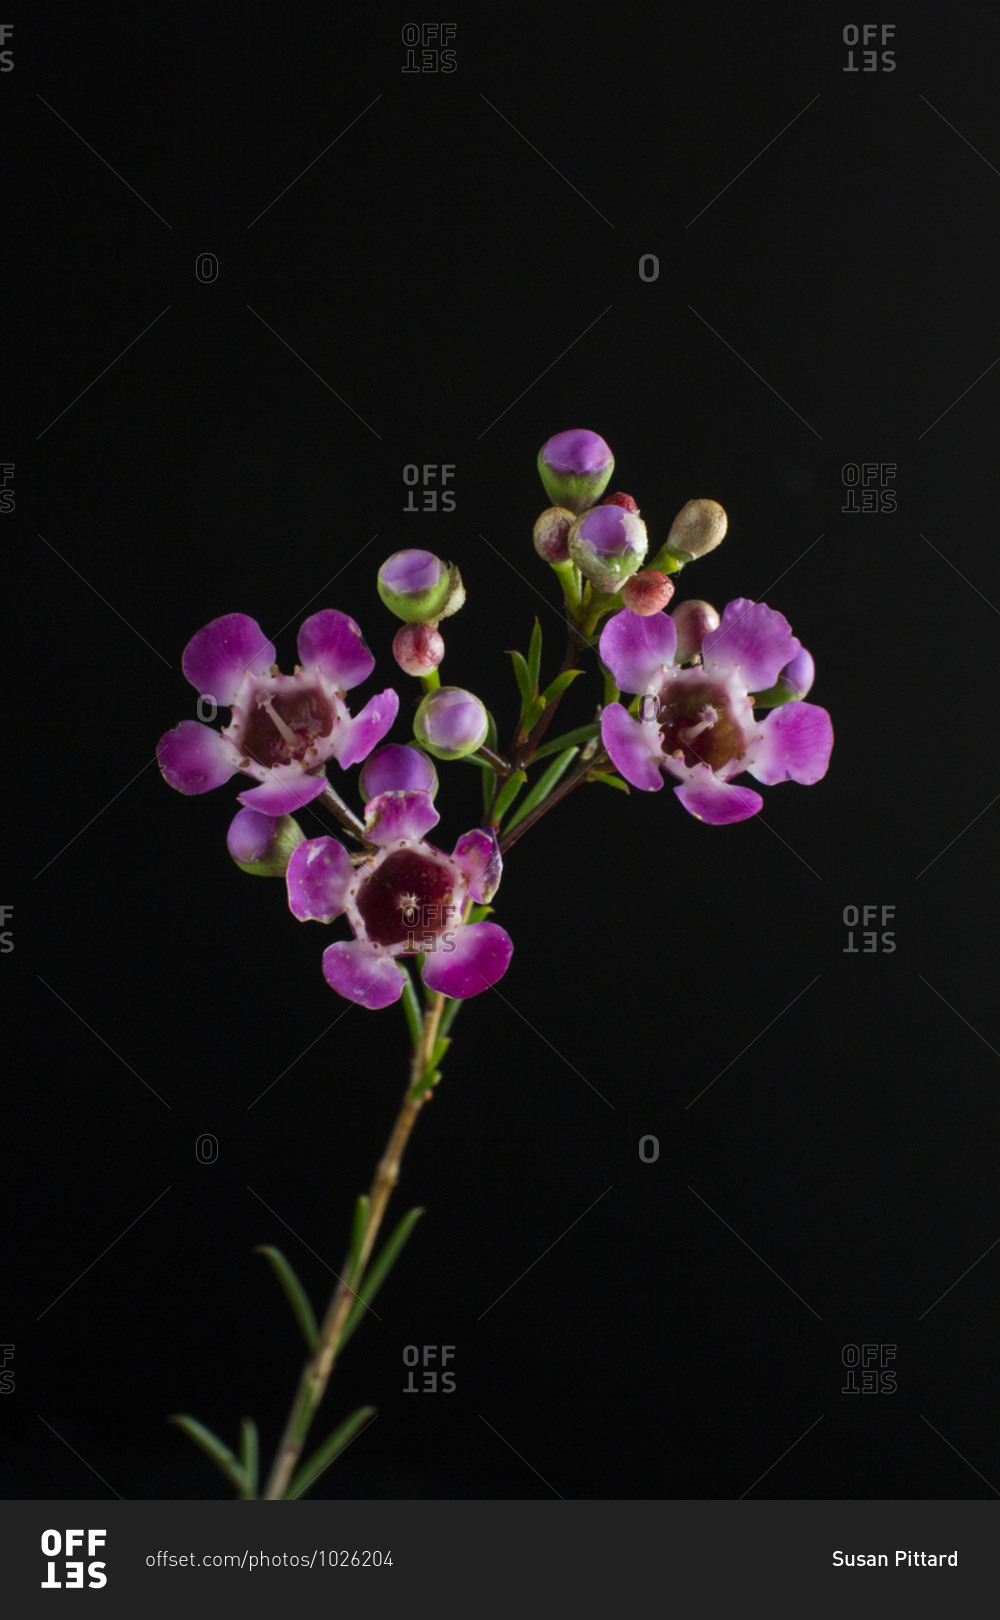 Pretty purple flowers in front of black background